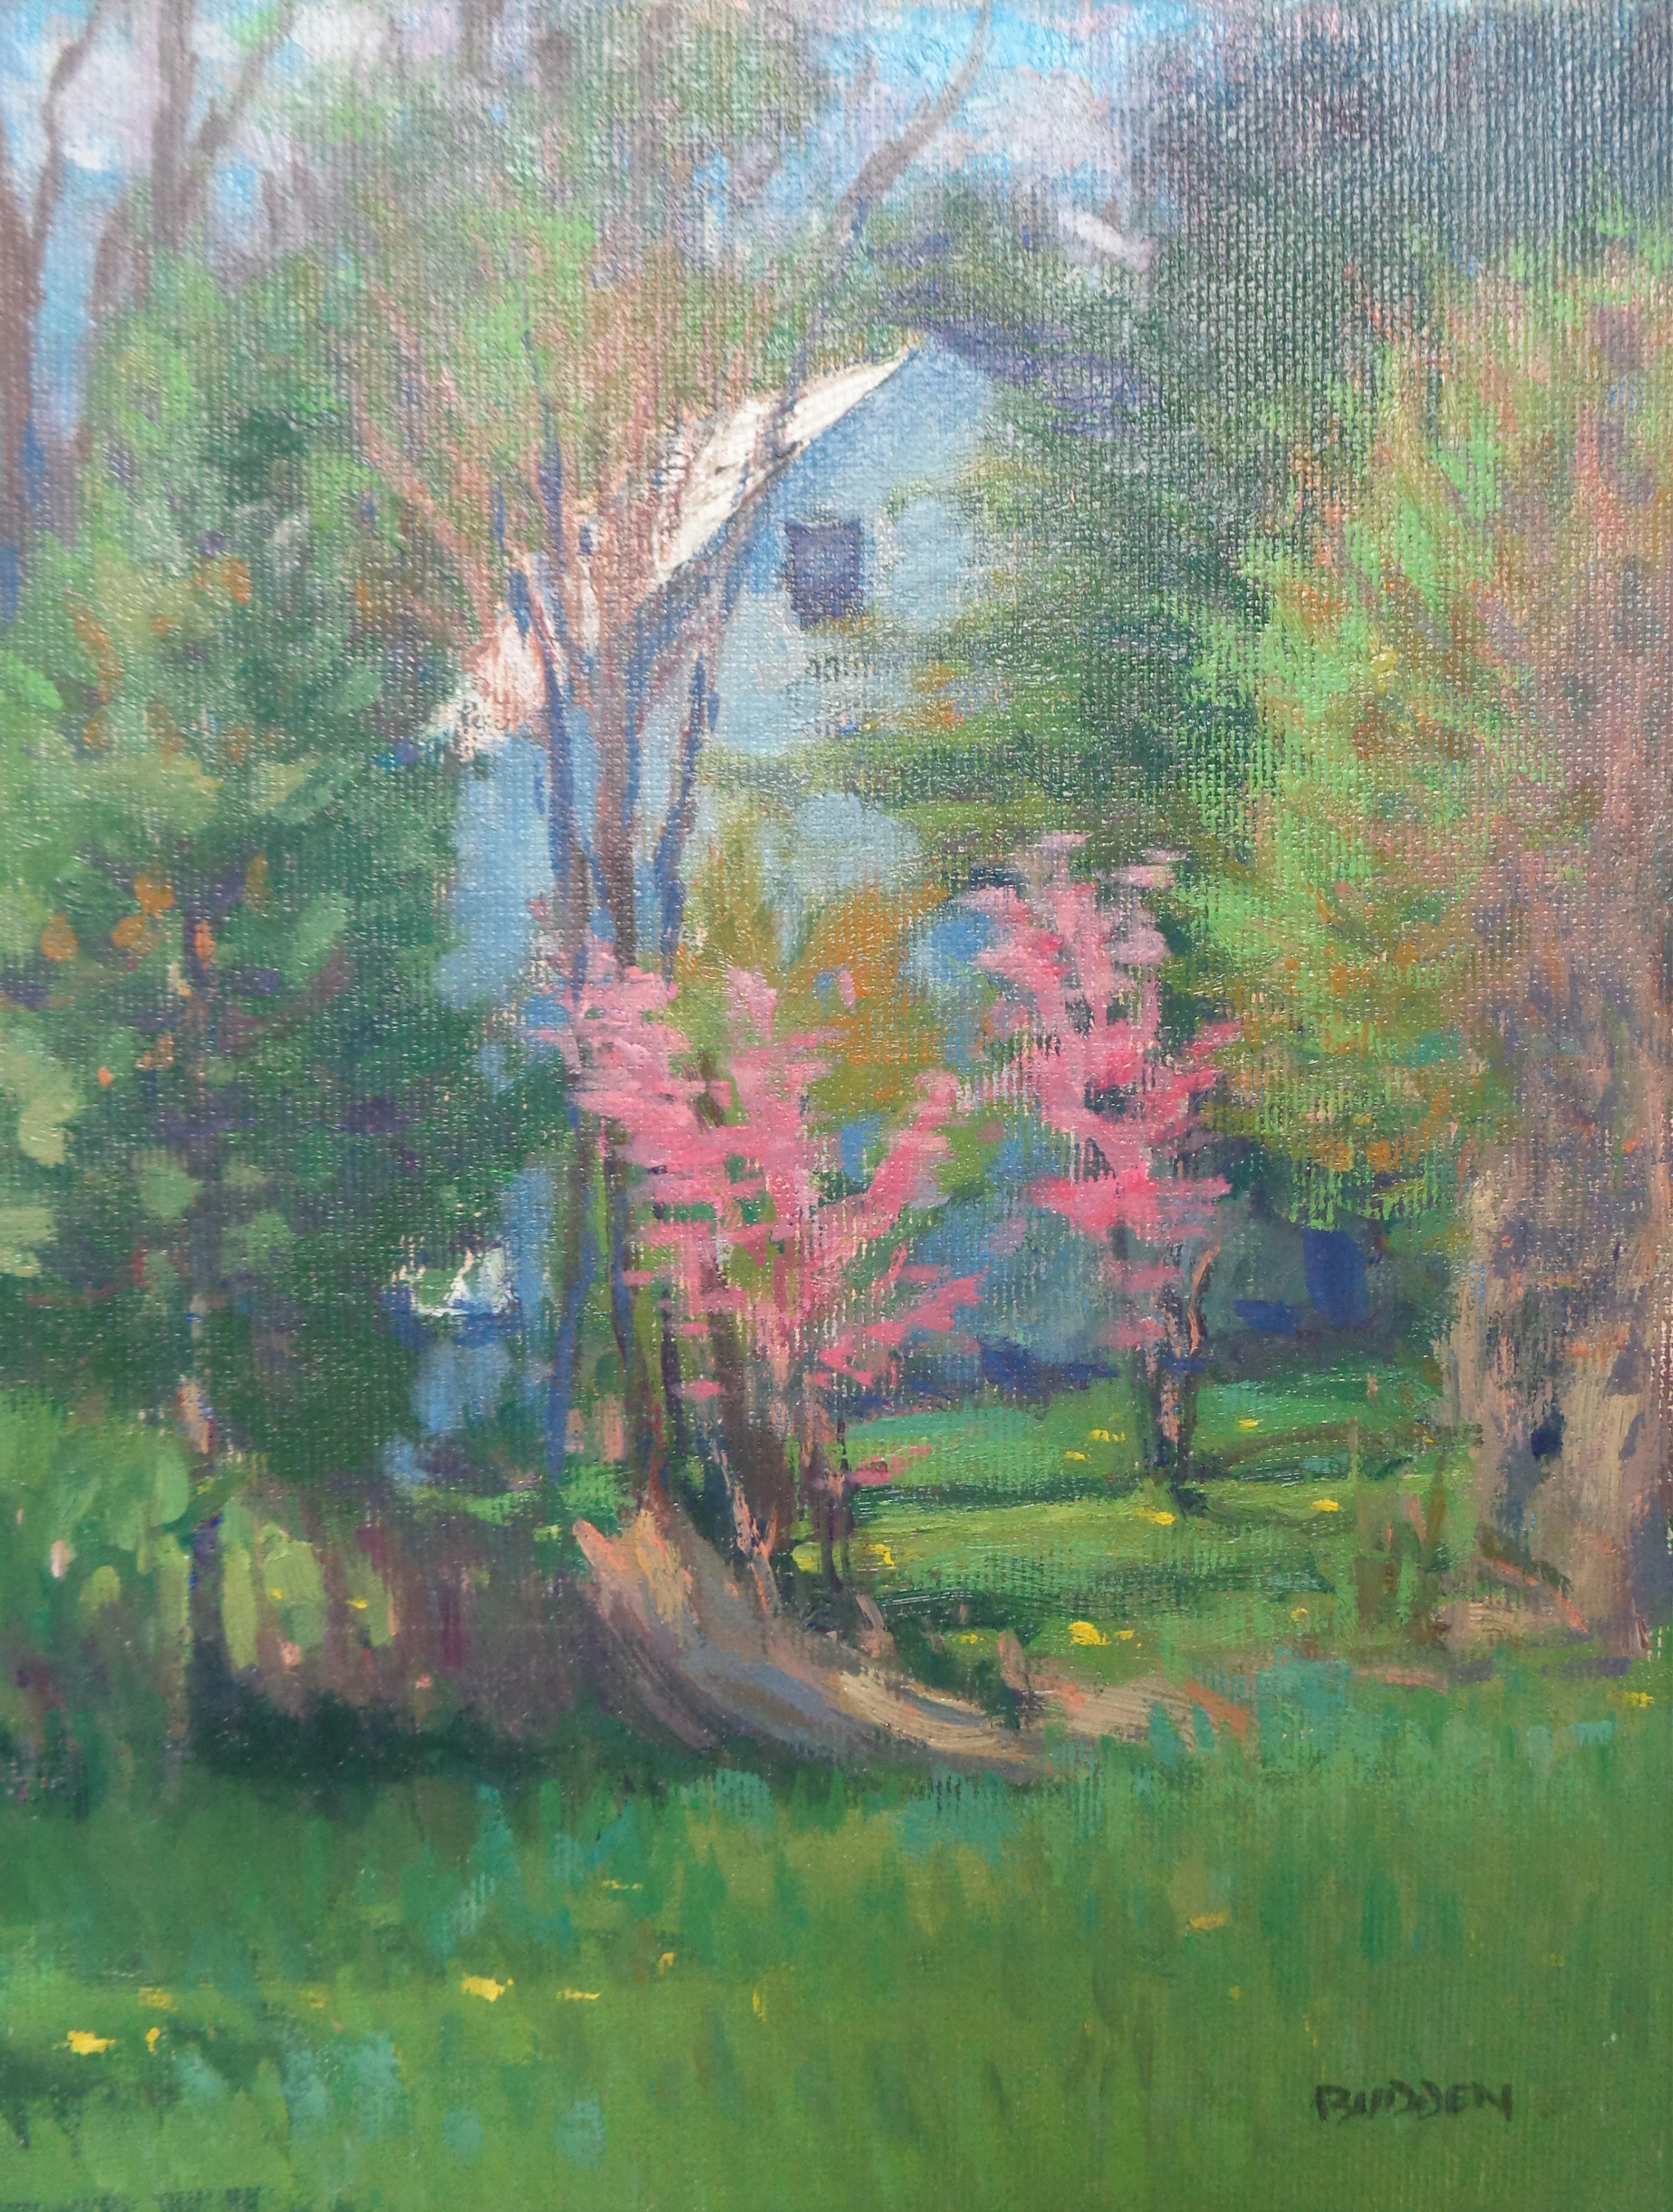  Impressionistic Floral Landscape Oil Painting by Michael Budden Early Spring For Sale 1